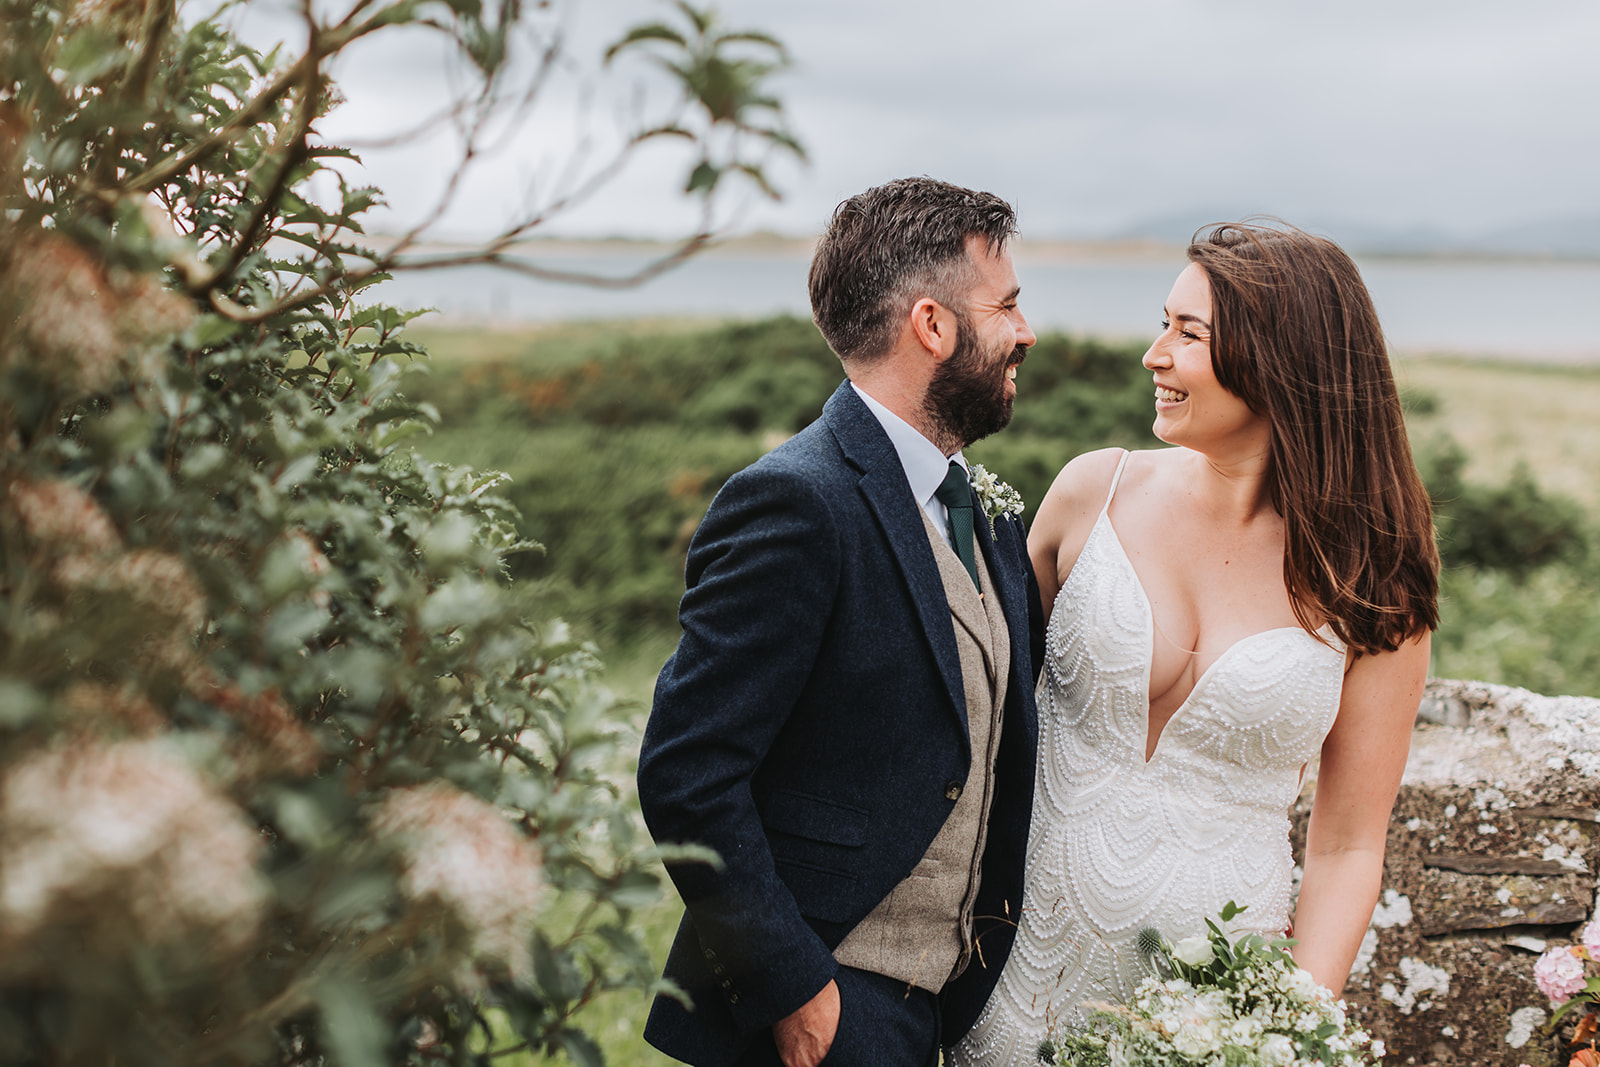 A wedding in Co. Kerry Ireland with views of the Wild Atlantic Way